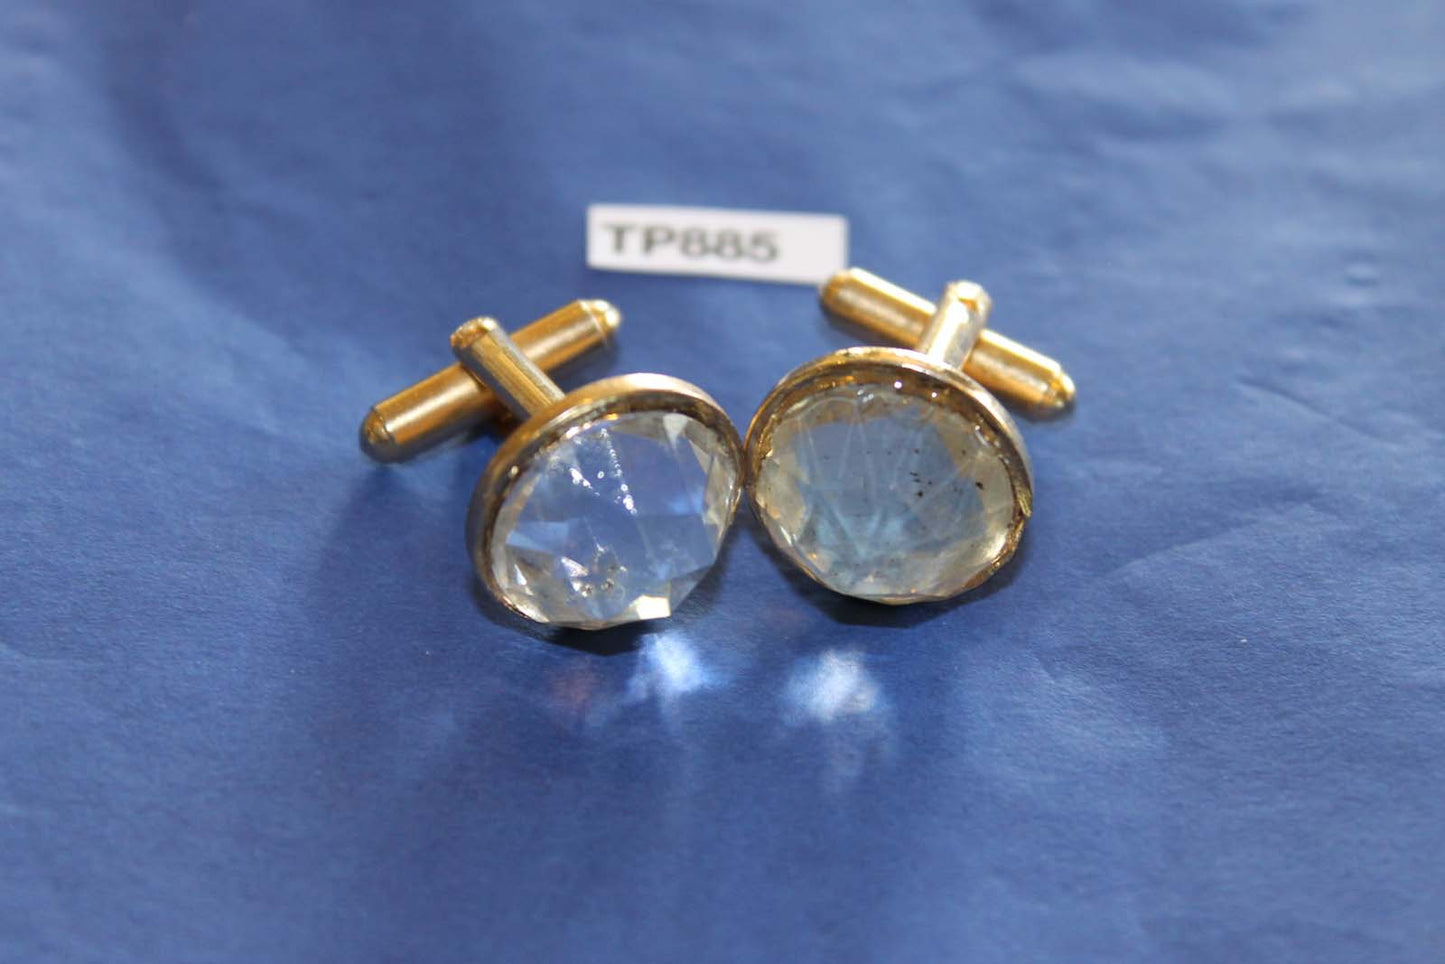 Vintage Cuff Links Large Clear Round Faceted Glass Stones Gold Metal Settings